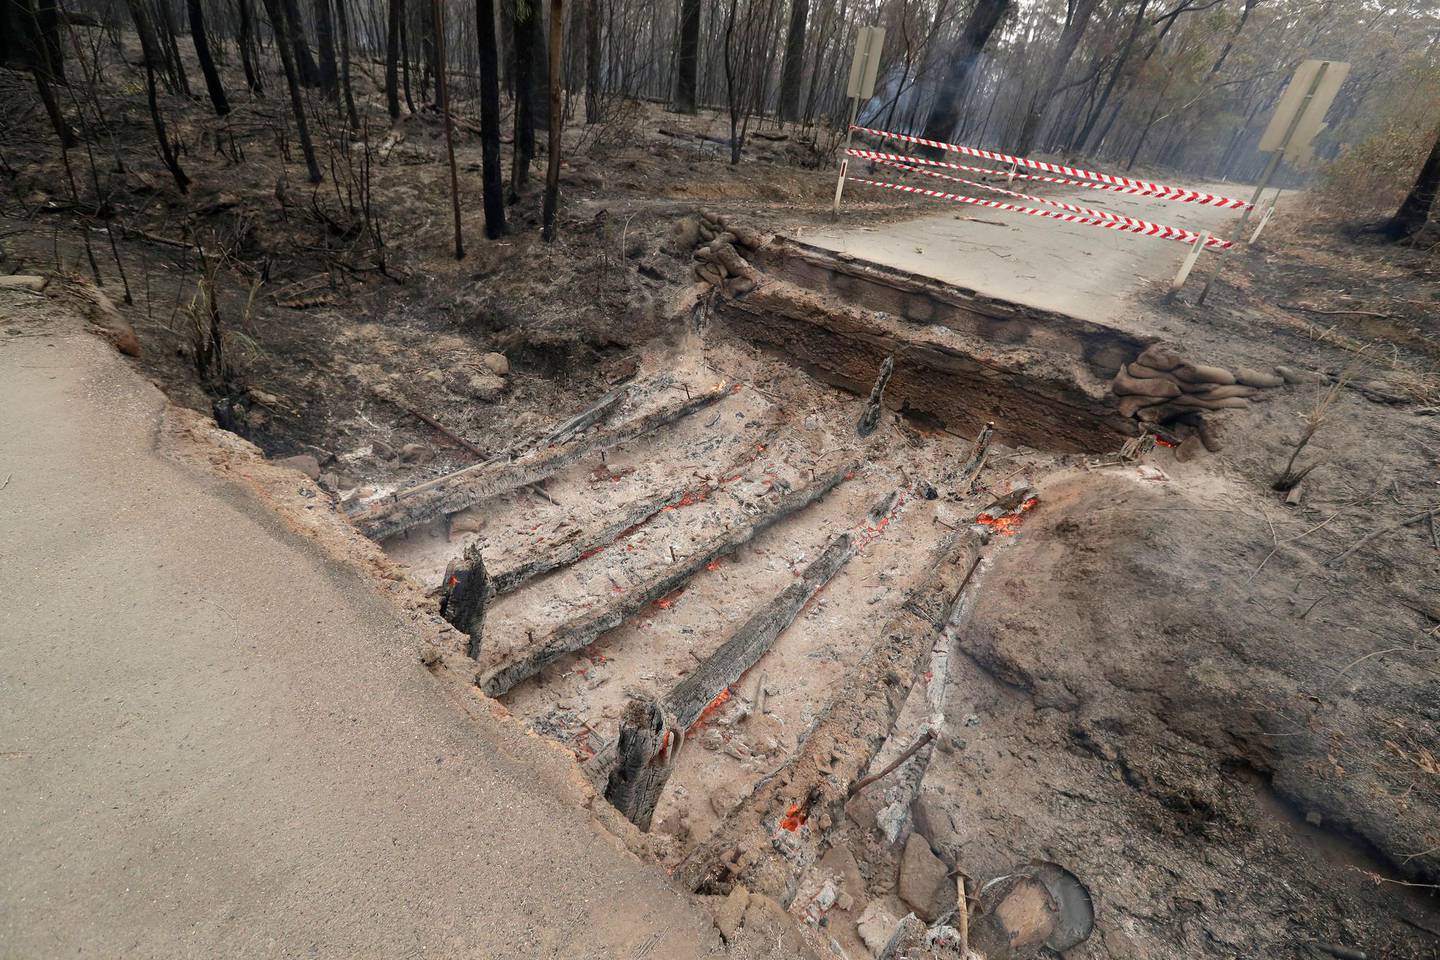 Timbers from a small bridge smolder after fire destroyed the crossing near Burrill Lake, Sunday, Jan. 5, 2020. Milder temperatures Sunday brought hope of a respite from wildfires that have ravaged three Australian states, destroying almost 2,000 homes. (AP Photo/Rick Rycroft)